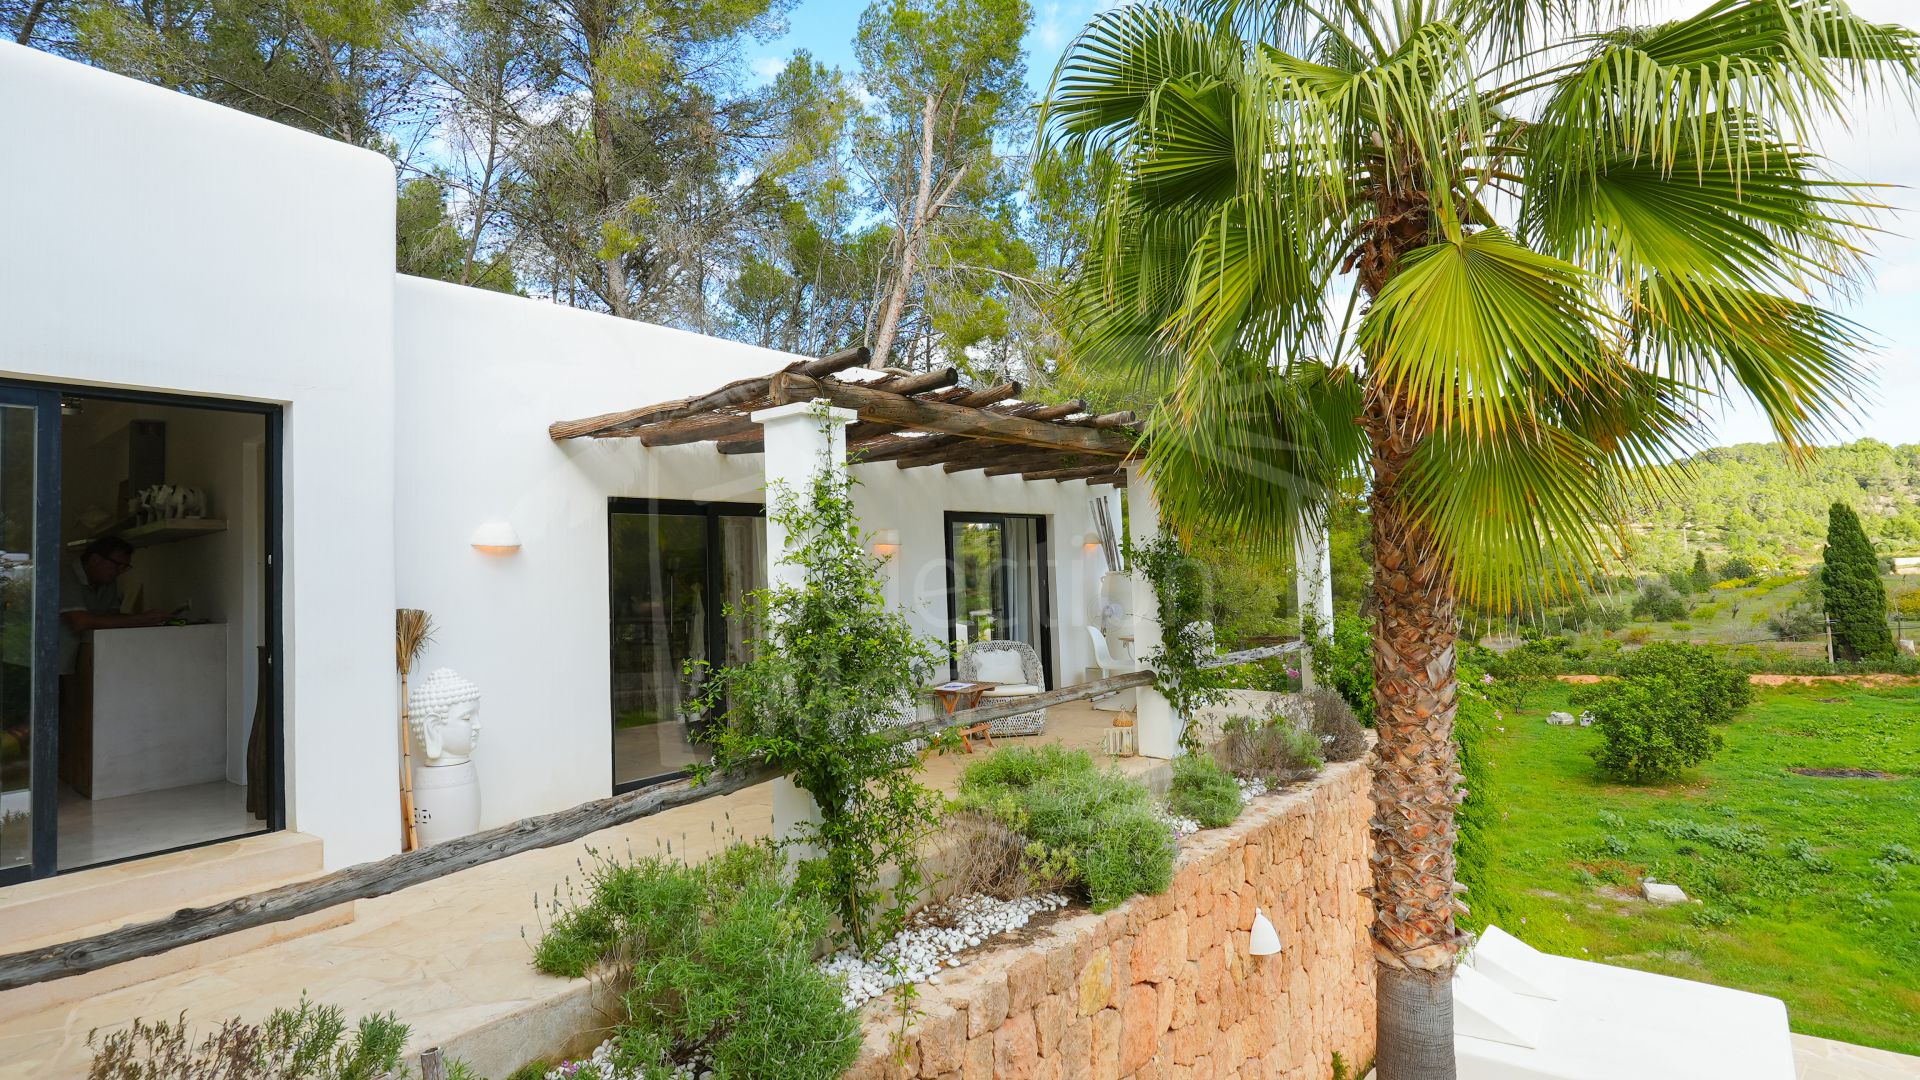 Beautiful country villa located in a small valley near San Miguel